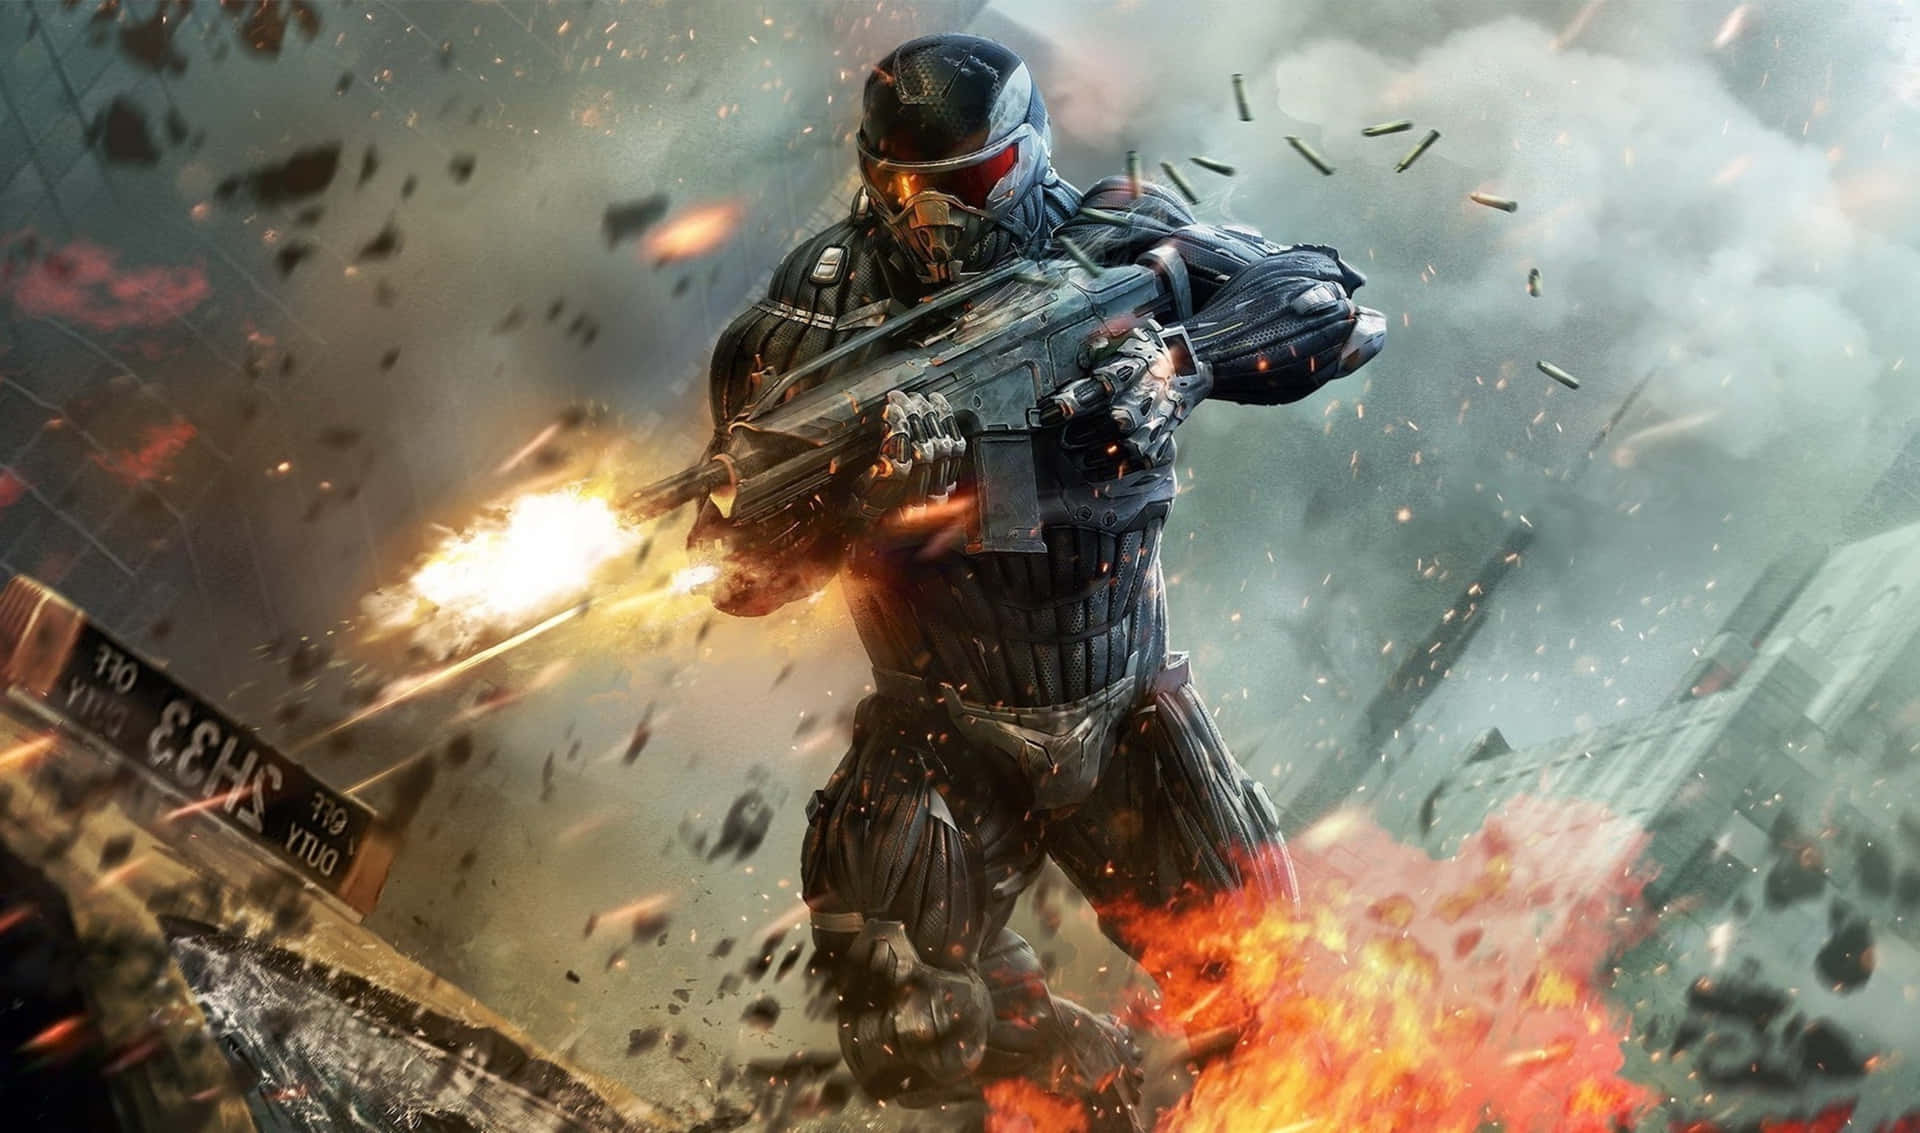 Explore the Incredible Visuals of Crysis 3